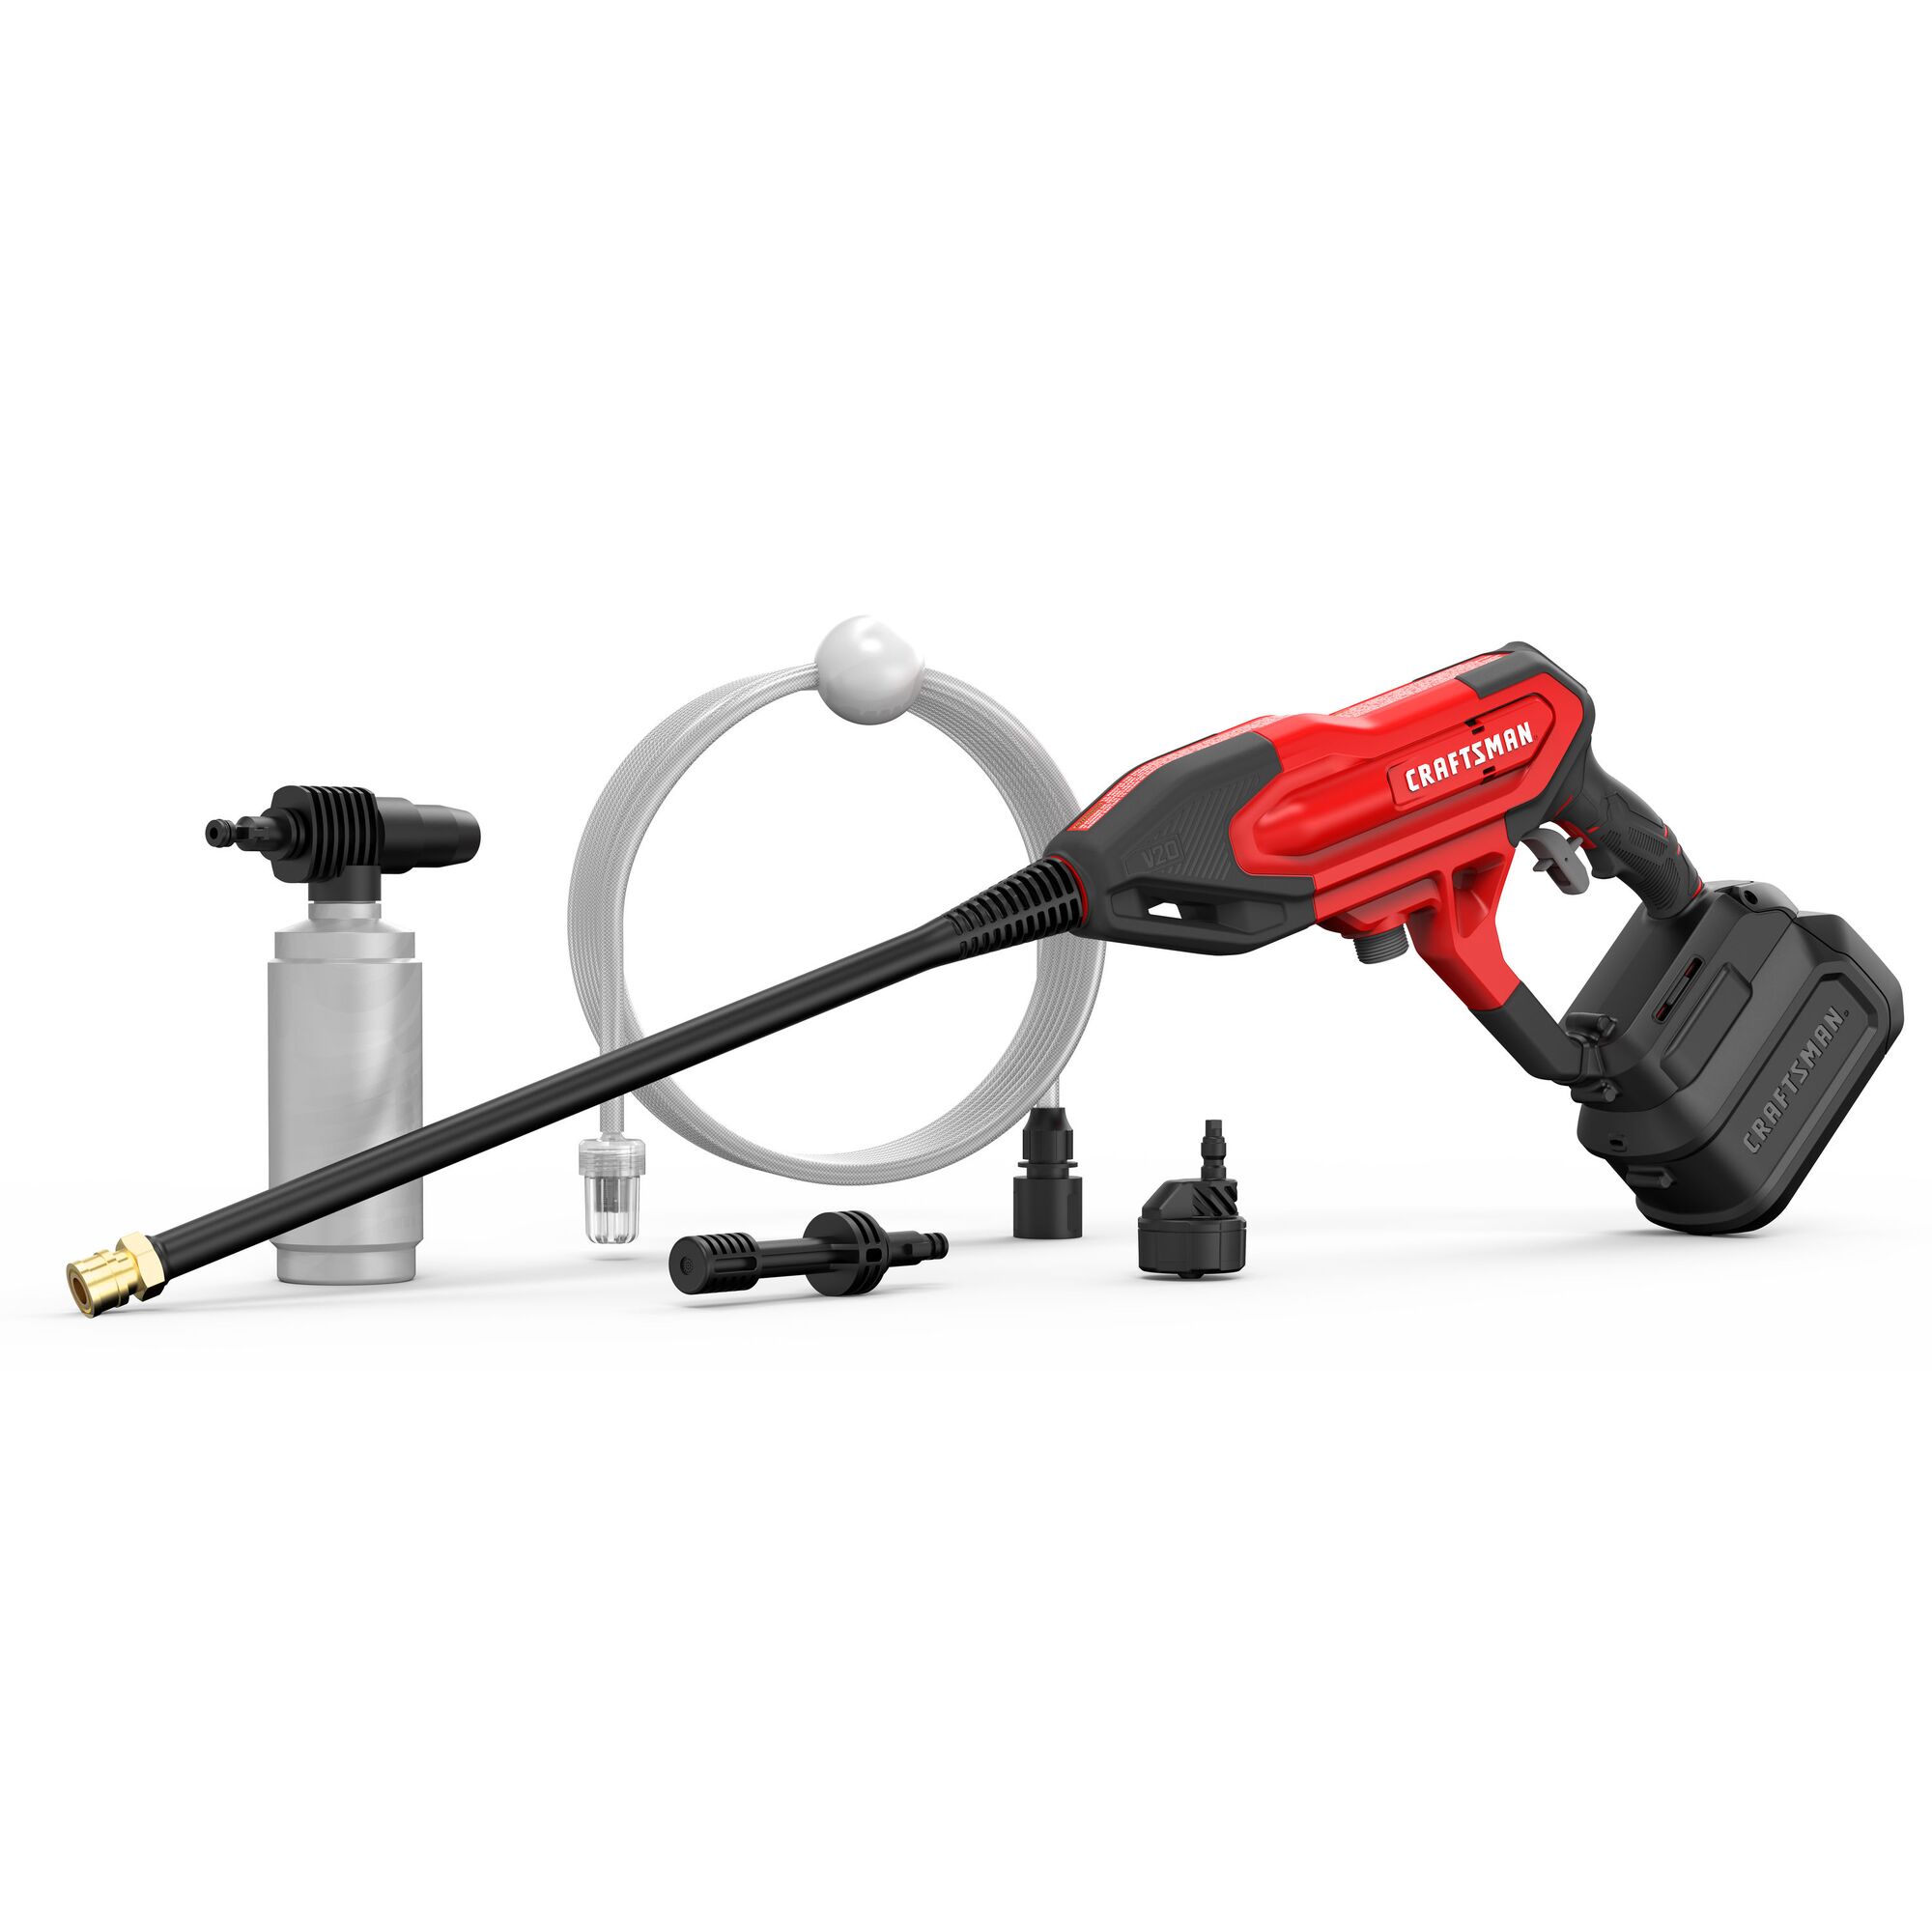 View of CRAFTSMAN Pressure Washers and additional tools in the kit